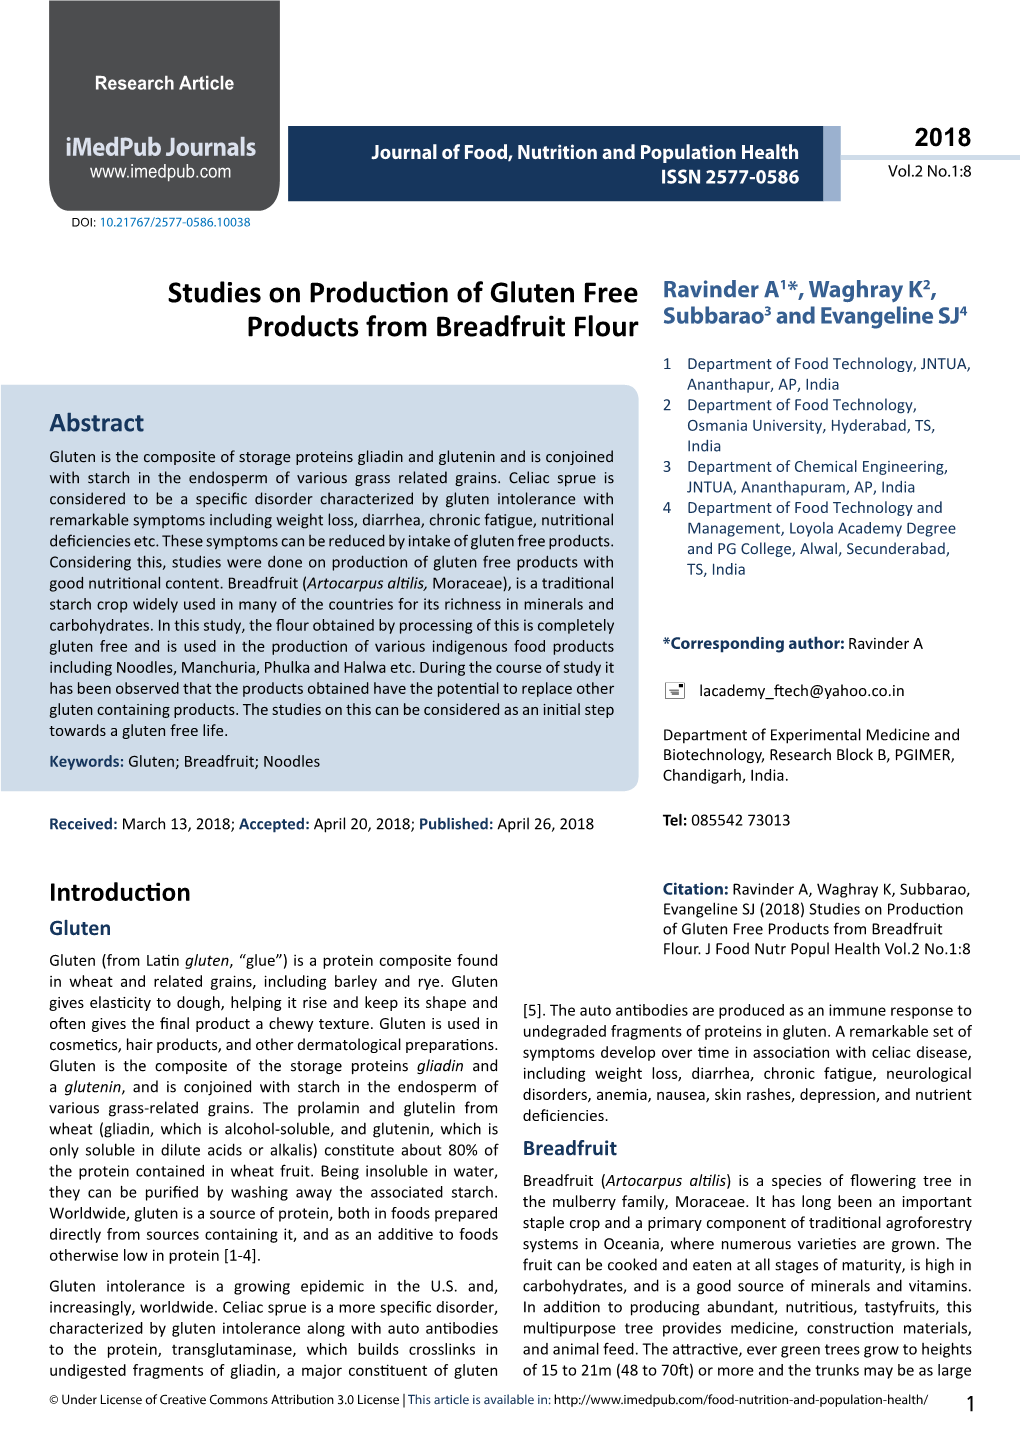 Studies on Production of Gluten Free Products from Breadfruit Flour